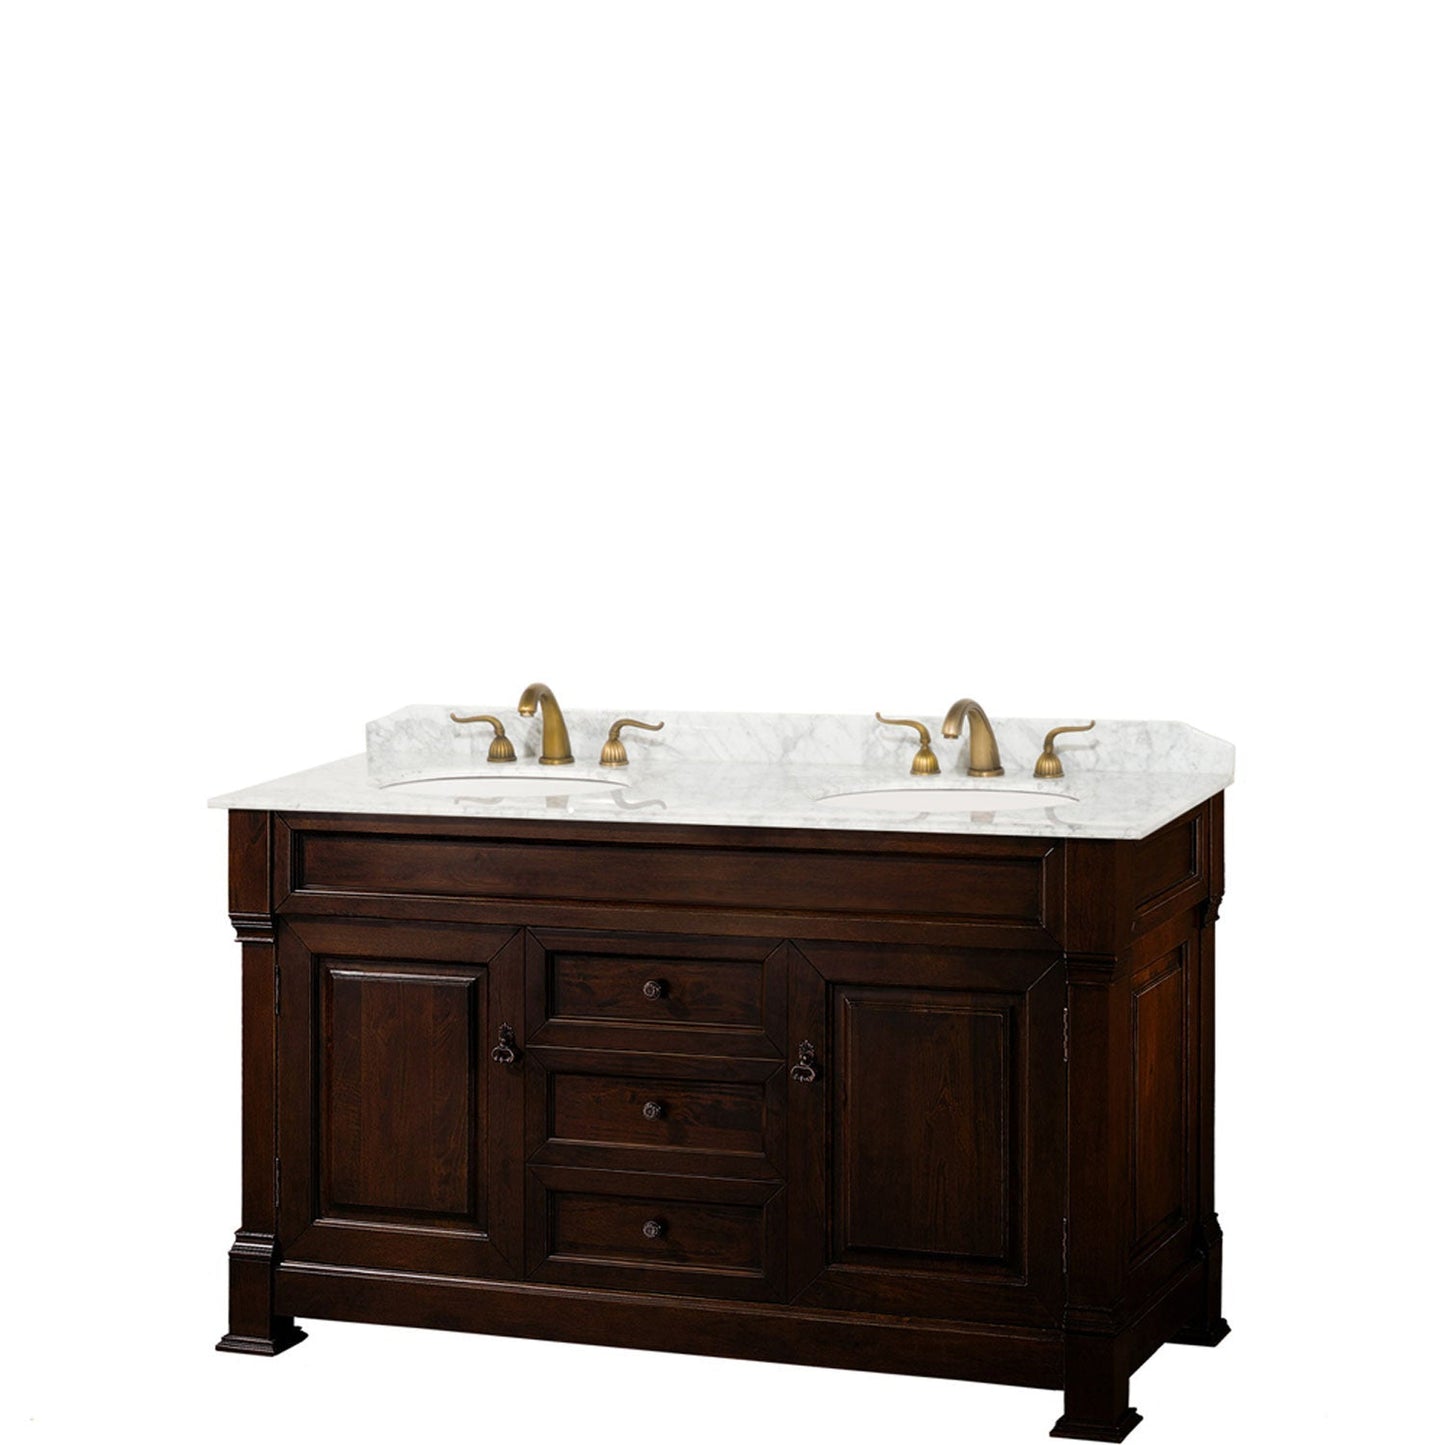 Wyndham Collection Andover 60" Double Bathroom Vanity in Dark Cherry With White Carrara Marble Countertop & Undermount Oval Sink